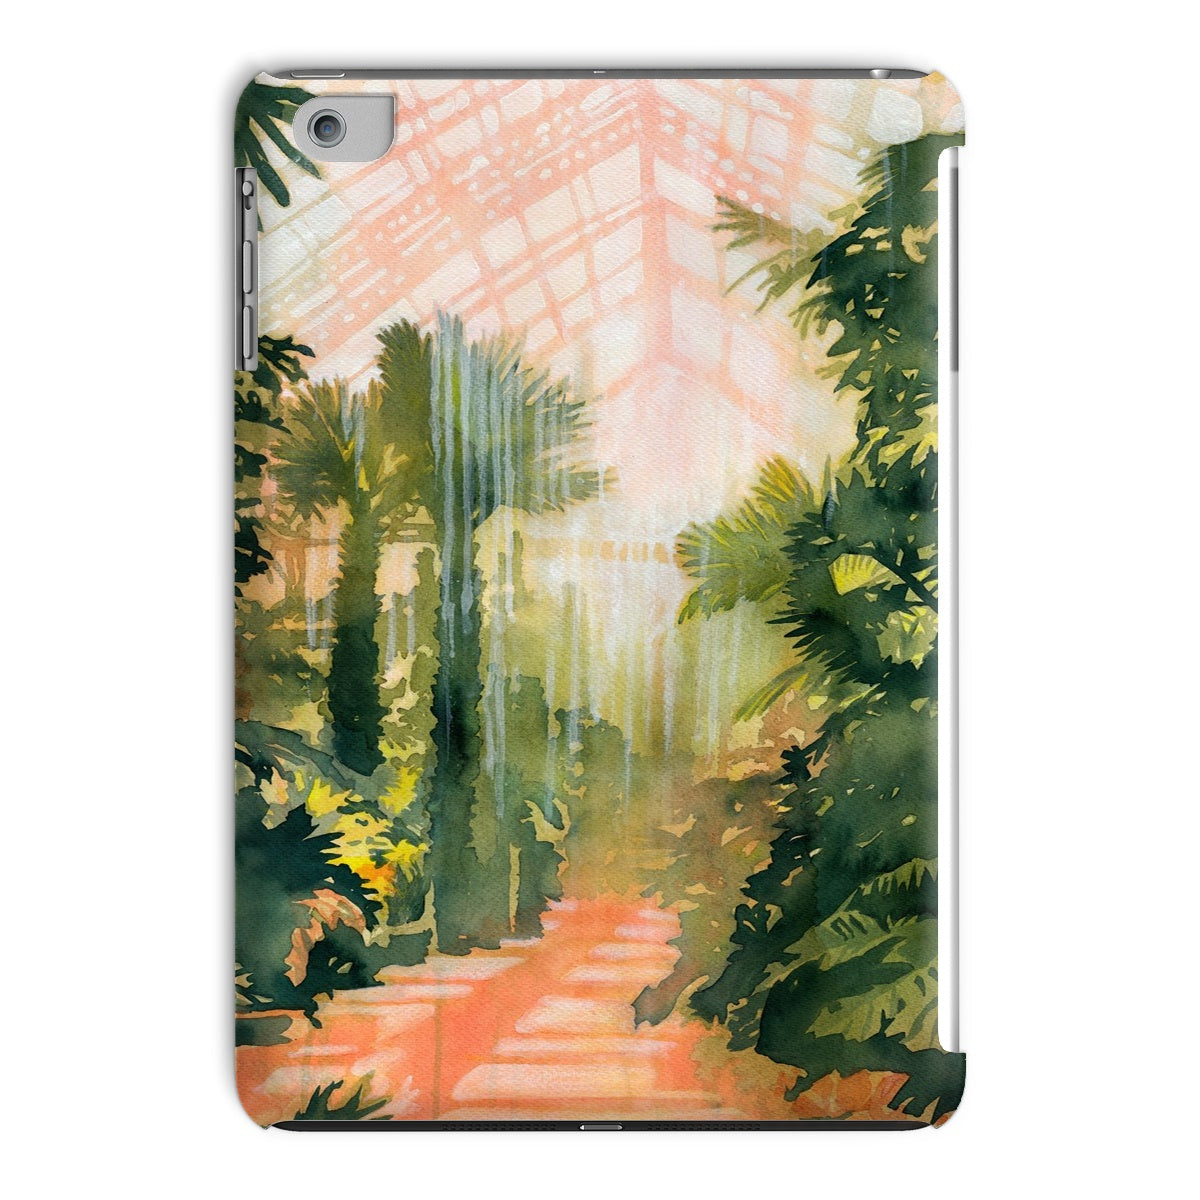 Warmth & Humidity -  Tablet Cases